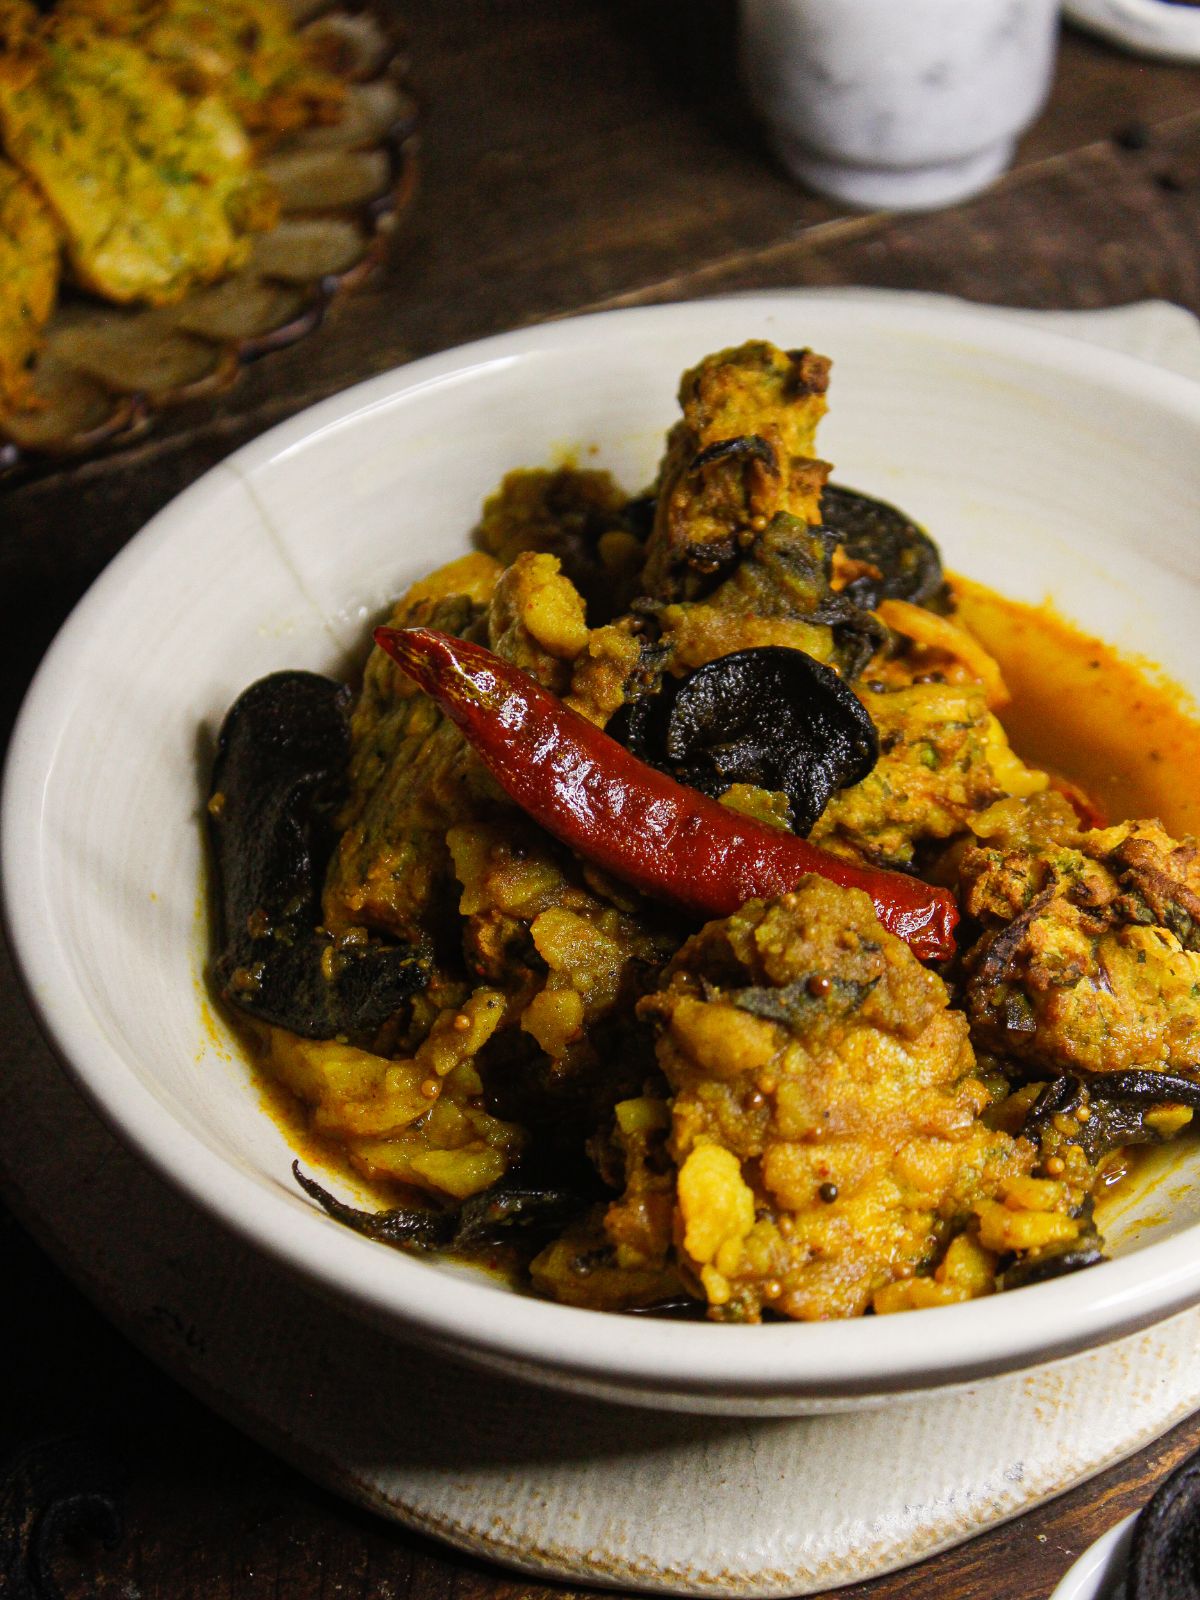 Spicy Assamese Boror Tenga: Sour Curry with Fritters